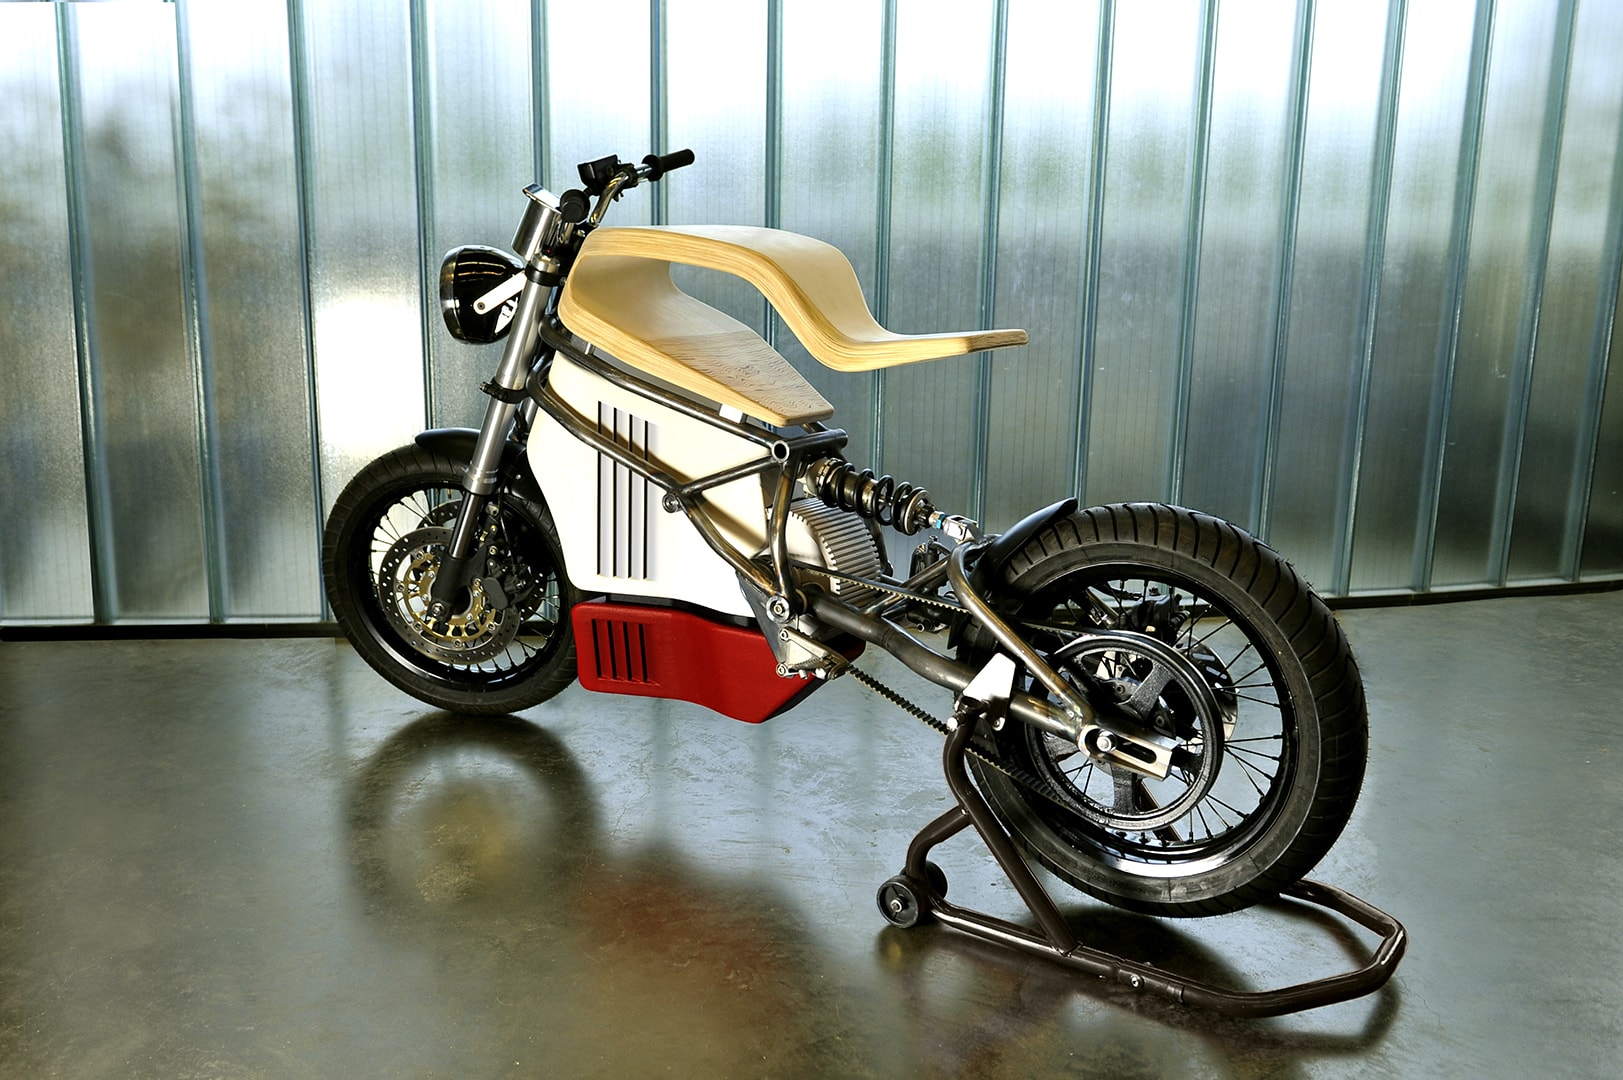 ERaw Is an Electric CafeRacer Prototype with a Truly Raw Wooden Seat